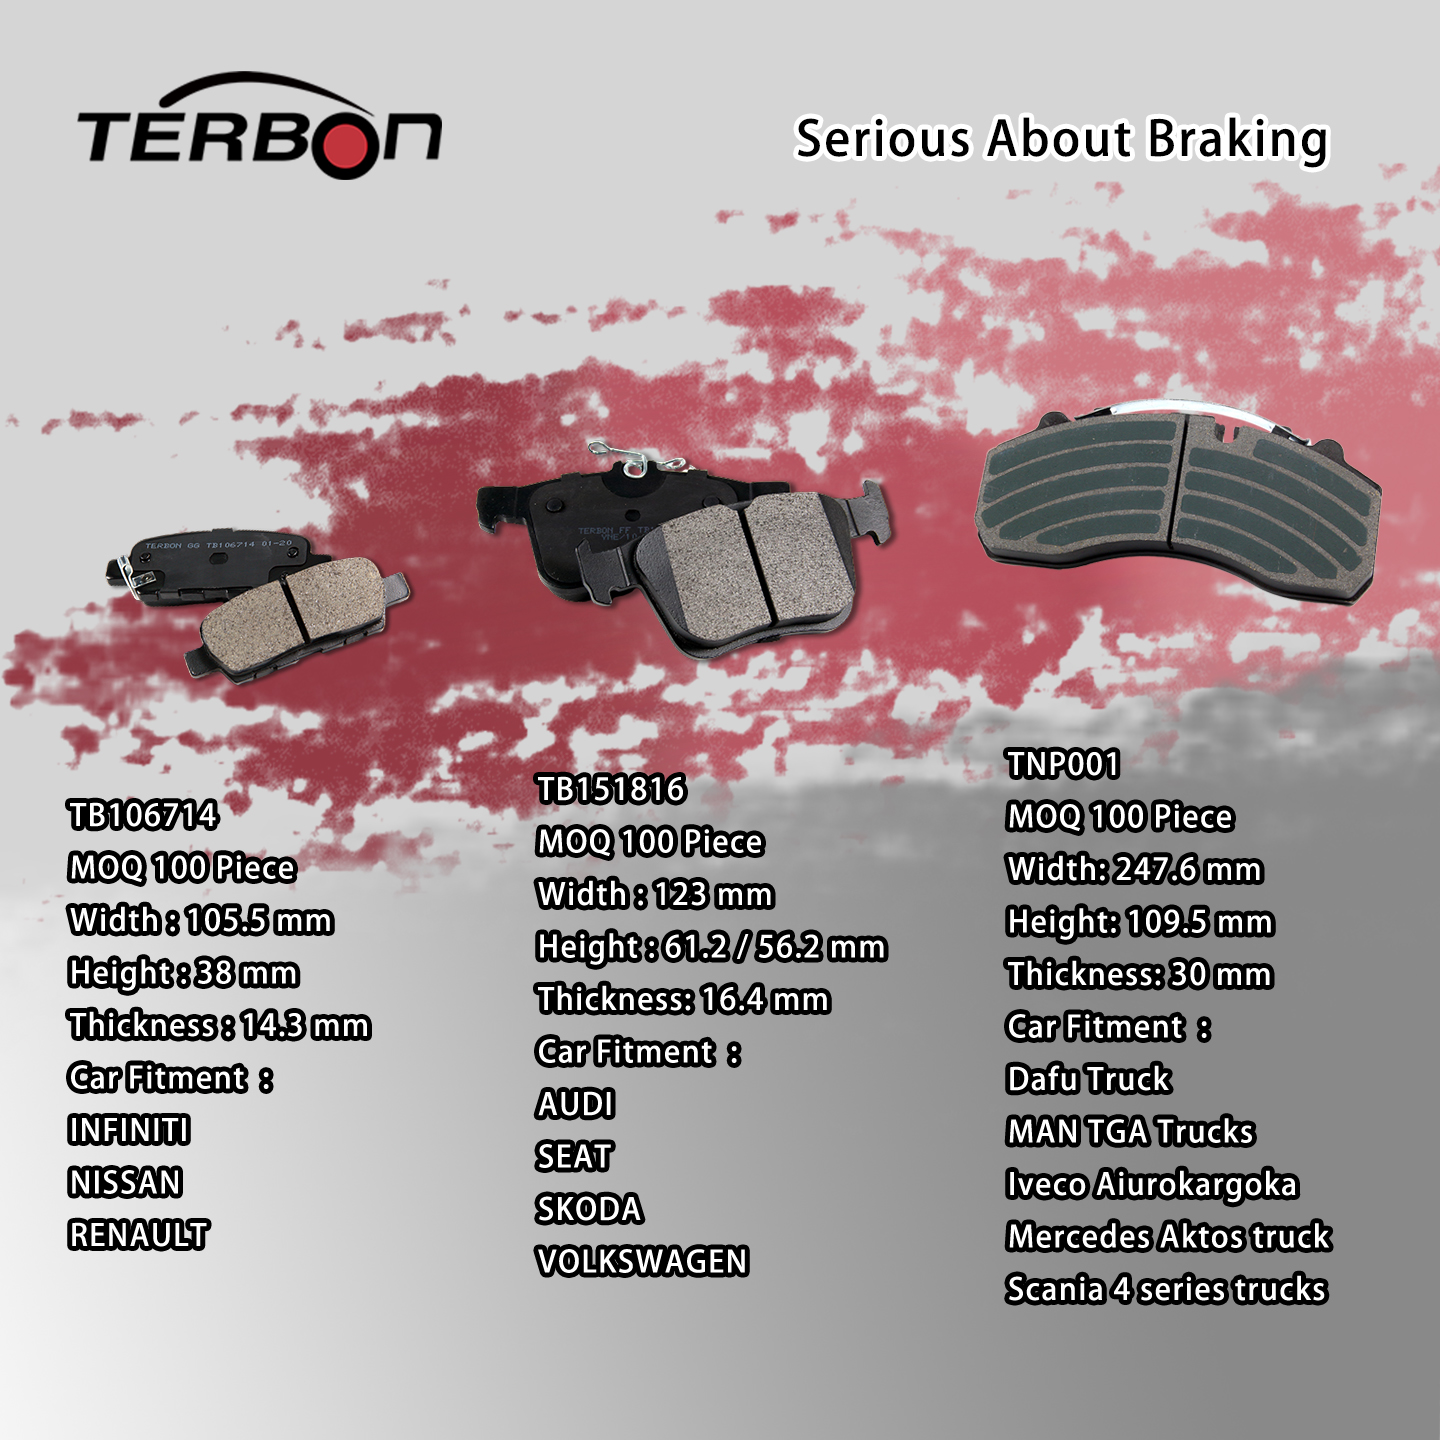 Terbon releases a wide range of high performance brake pads covering a wide range of vehicle models